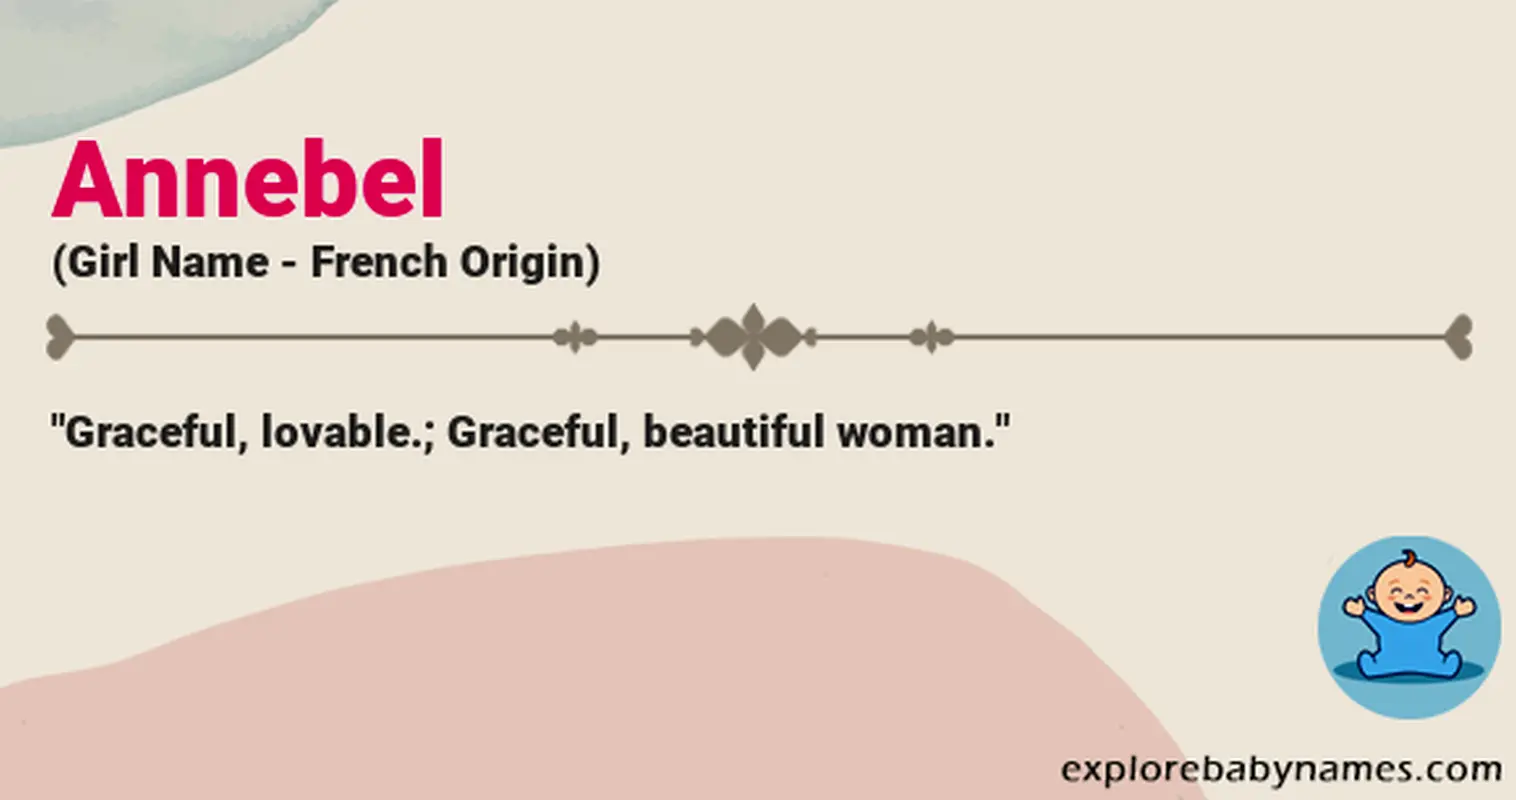 Meaning of Annebel